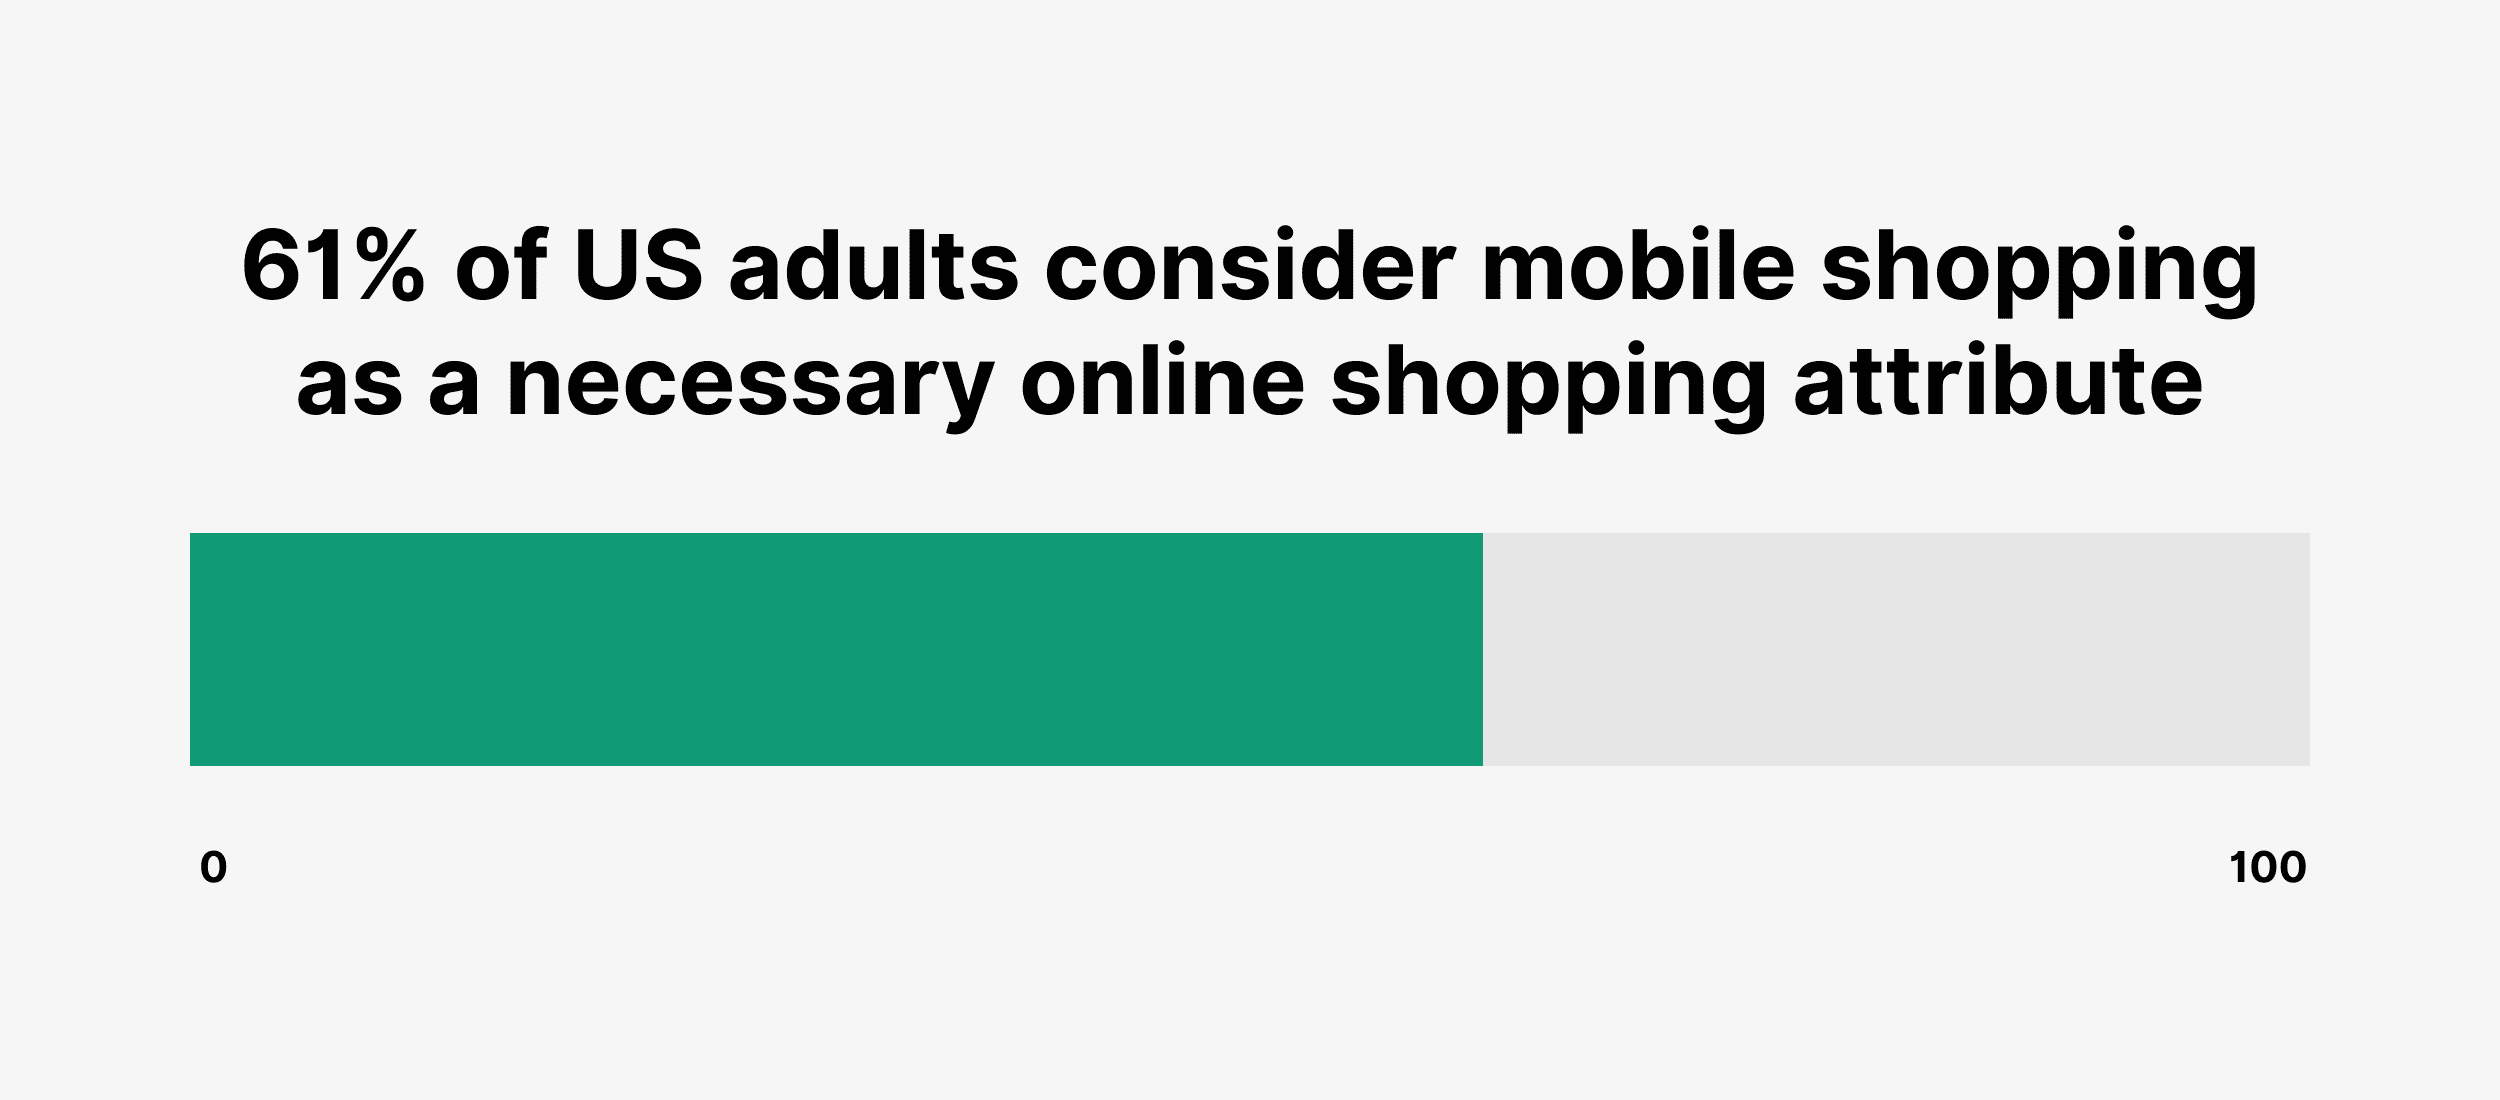 61% of US adults consider mobile shopping as a necessary online shopping attribute